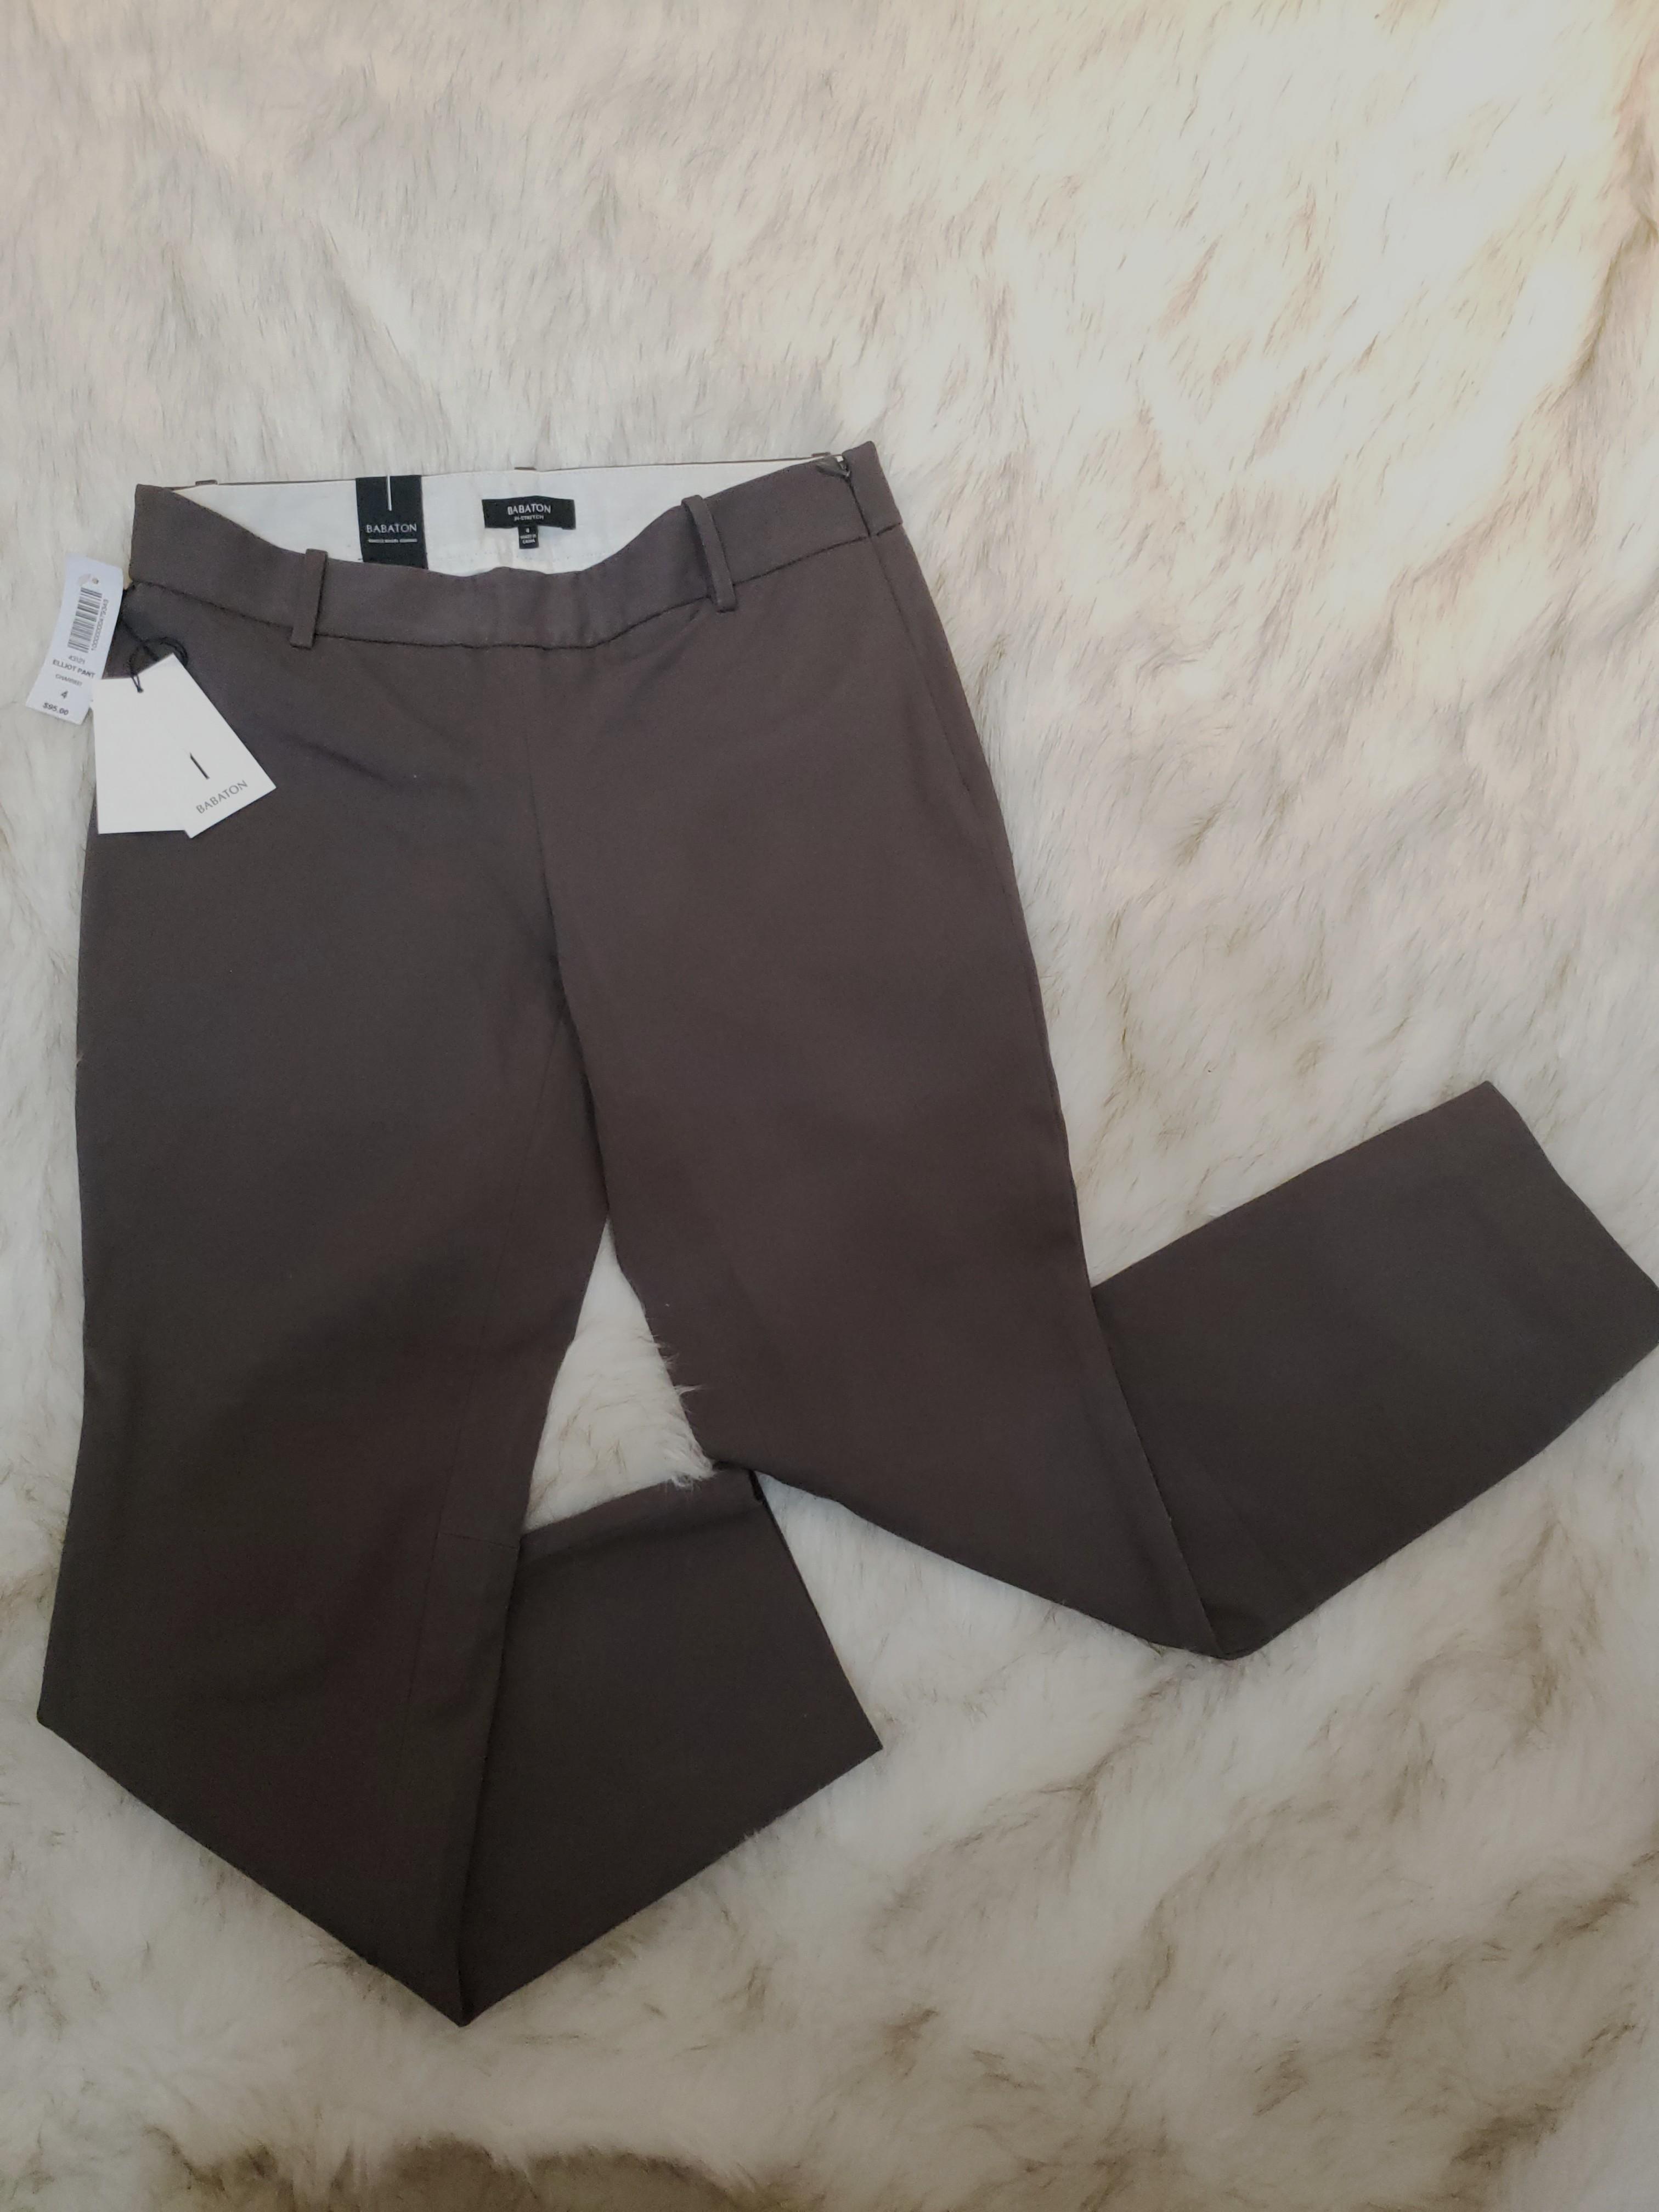 BNWT Aritzia Babaton Elliot Pants in Charred (dark taupe/olive) size 4,  Women's Fashion, Clothes on Carousell